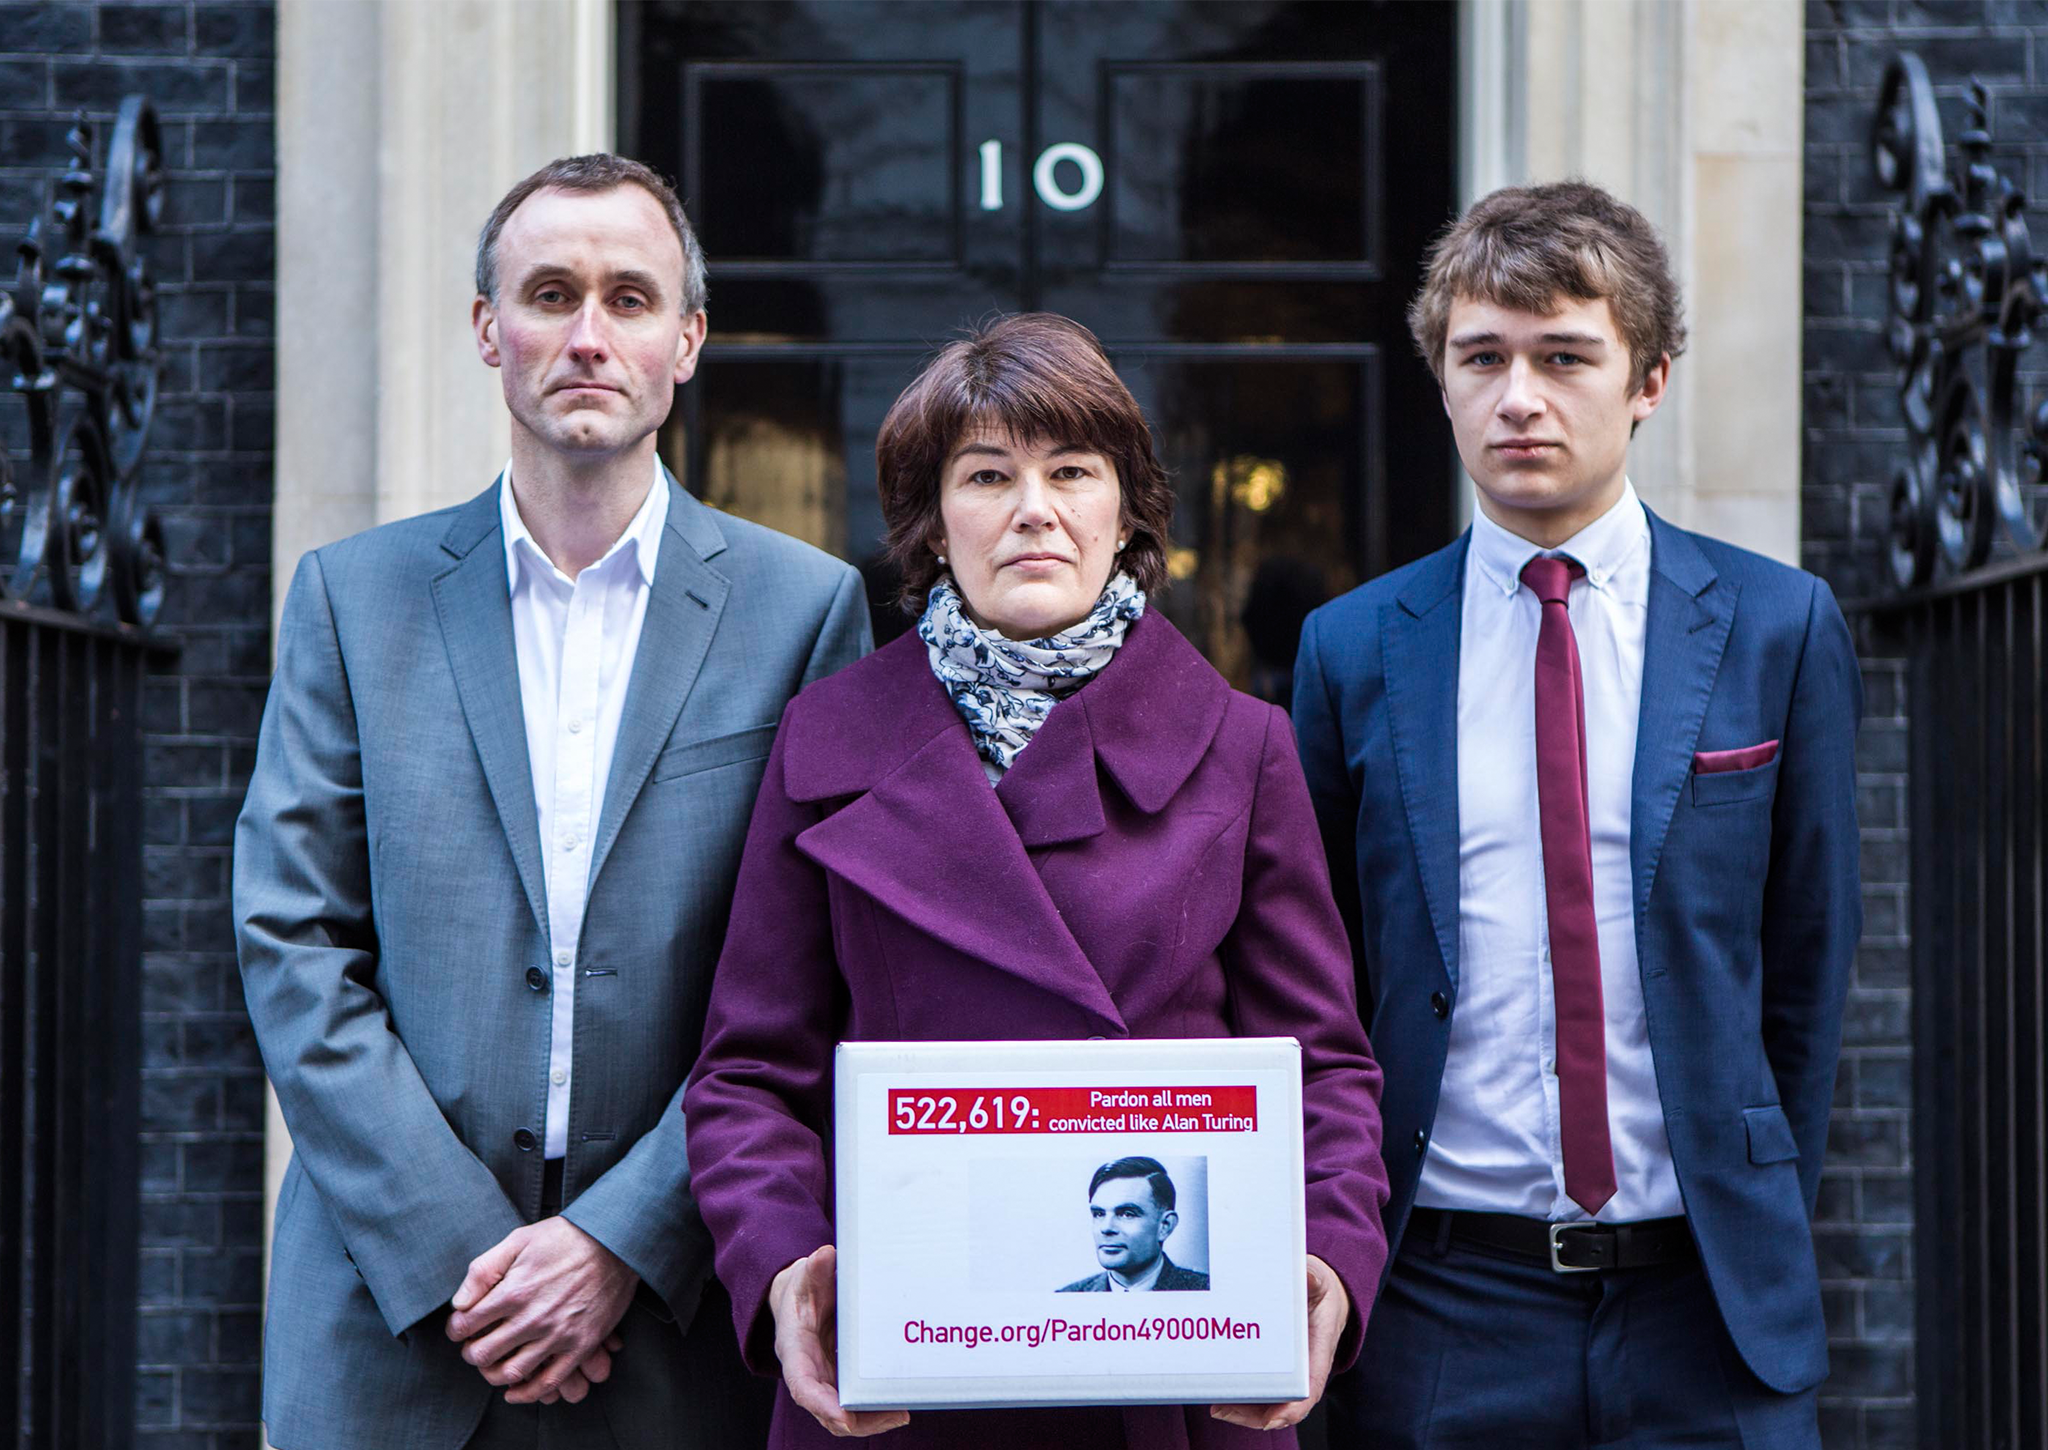 The family of Alan Turing deliver the change.org petition to Downing Street signed by almost half a million people calling for more than 49,000 British gay men convicted under historic anti-gay laws in the UK
